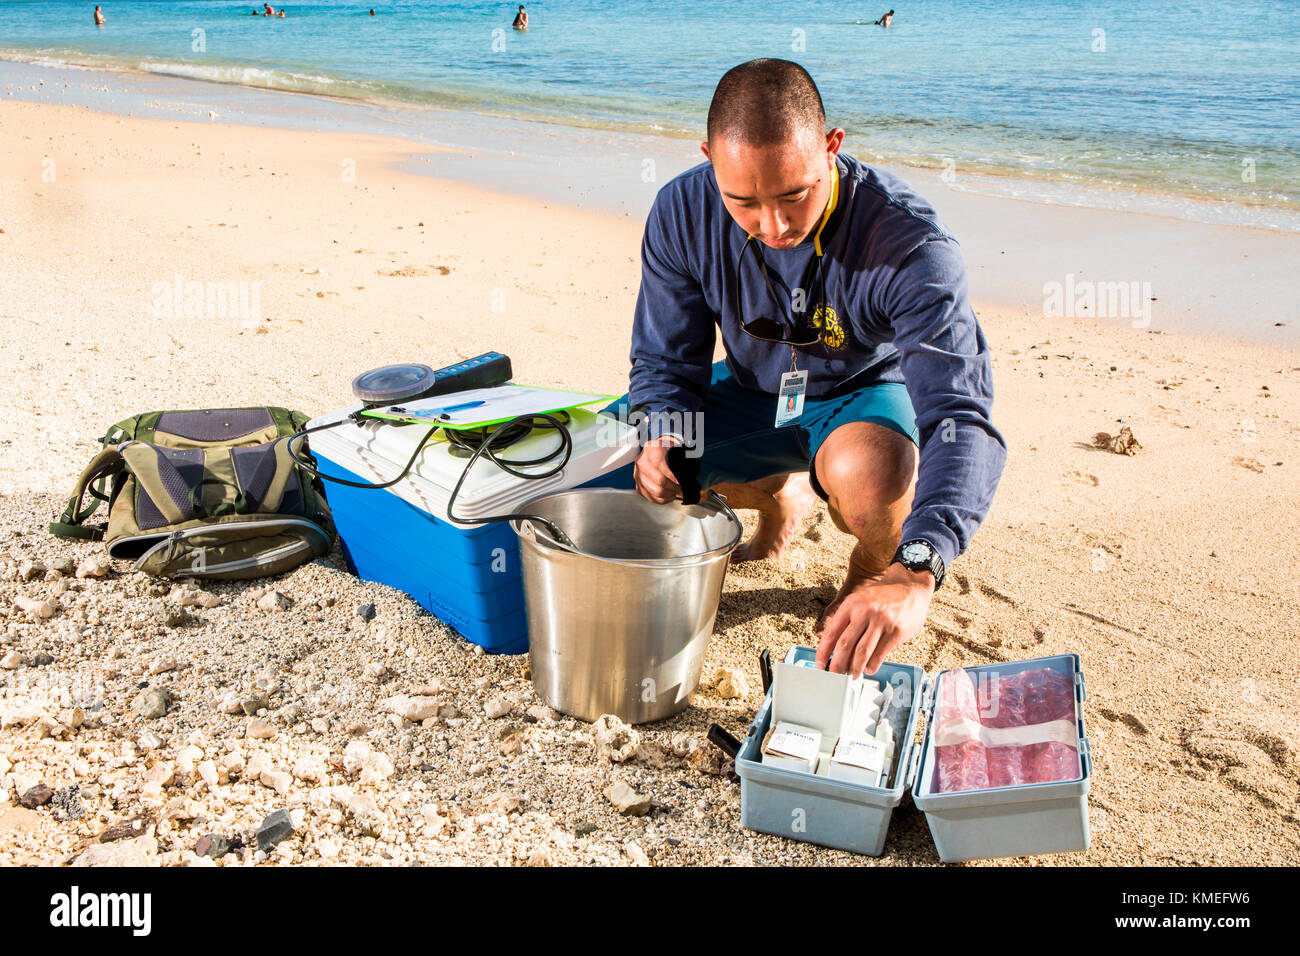 Wataru Kumagai of the State of Hawaii Department of Health Clean Water Branch,demonstrates water sampling of Hawaiian beaches at Ala Moana Beach in Honolulu using instruments such as a turbidity meter.For the full scope of readings,lab work has be done offsite. Stock Photo